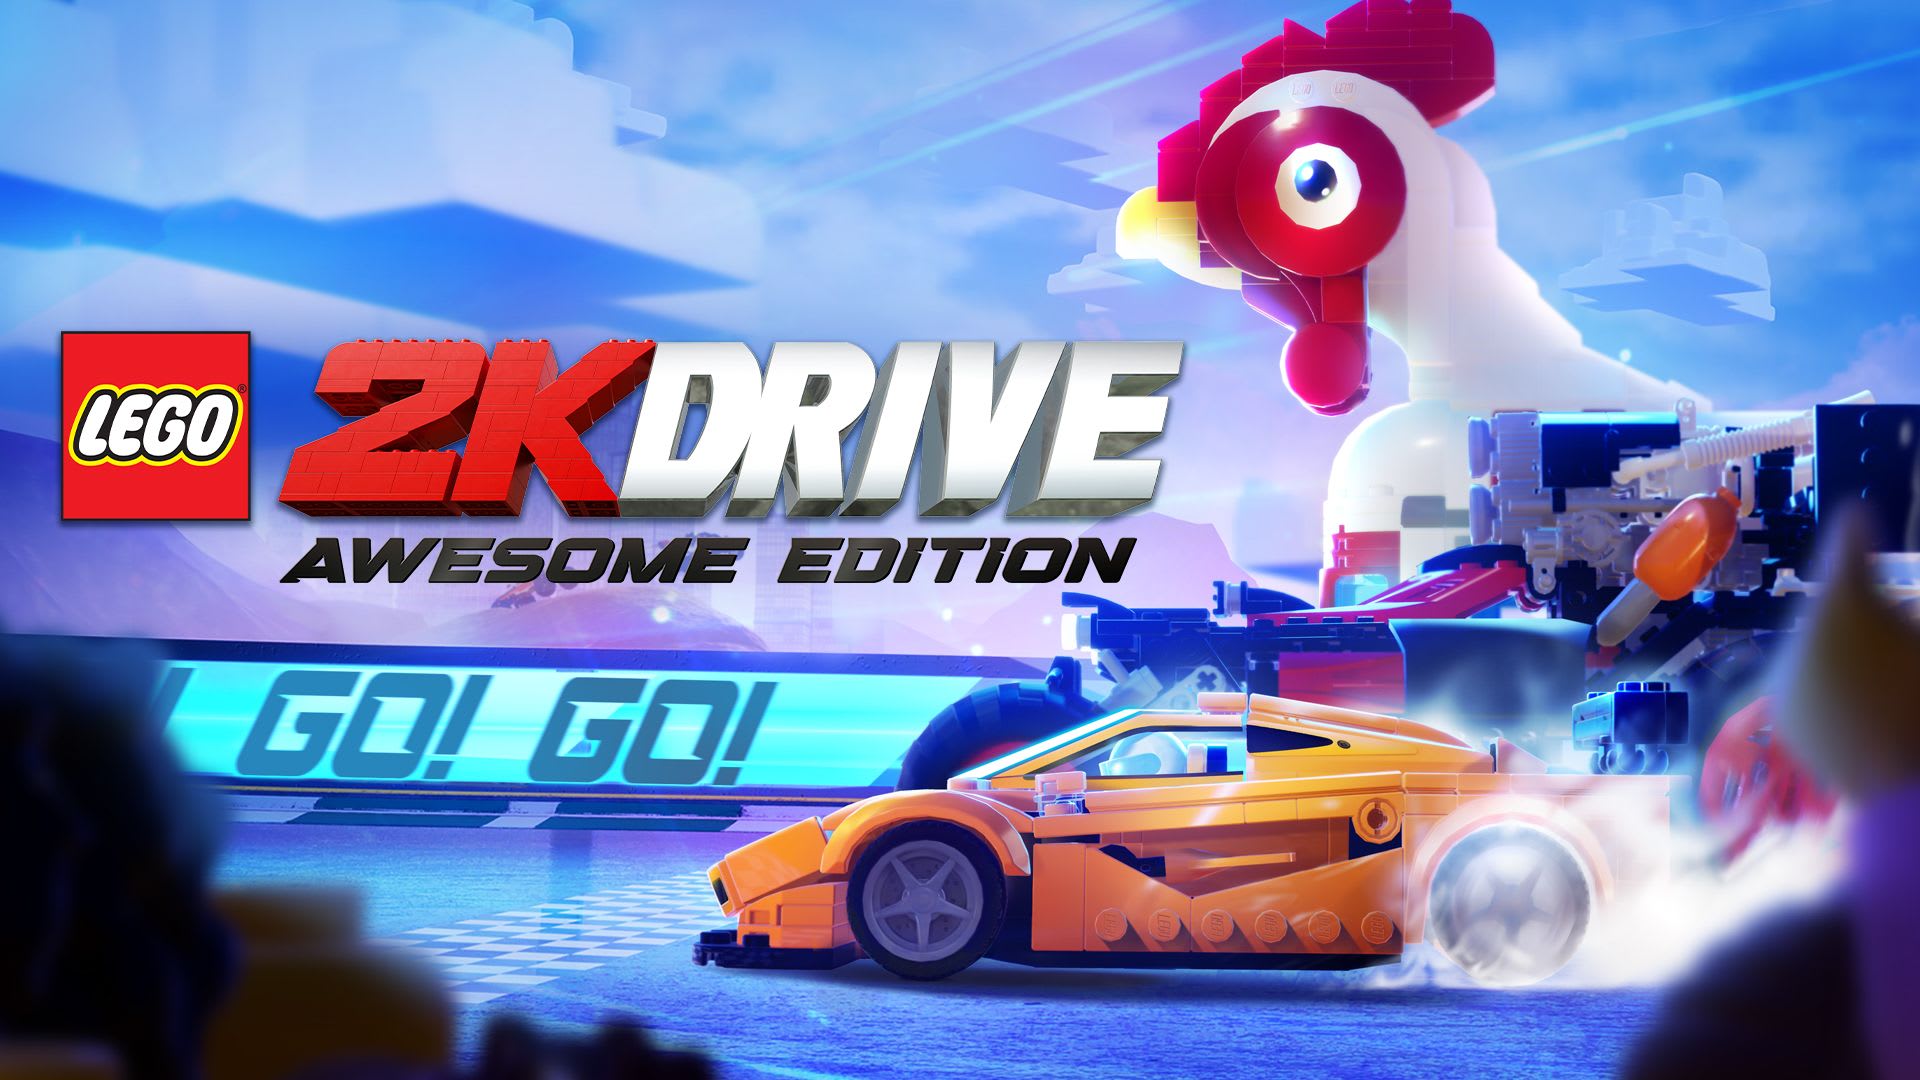 LEGO® 2K Drive Awesome Edition